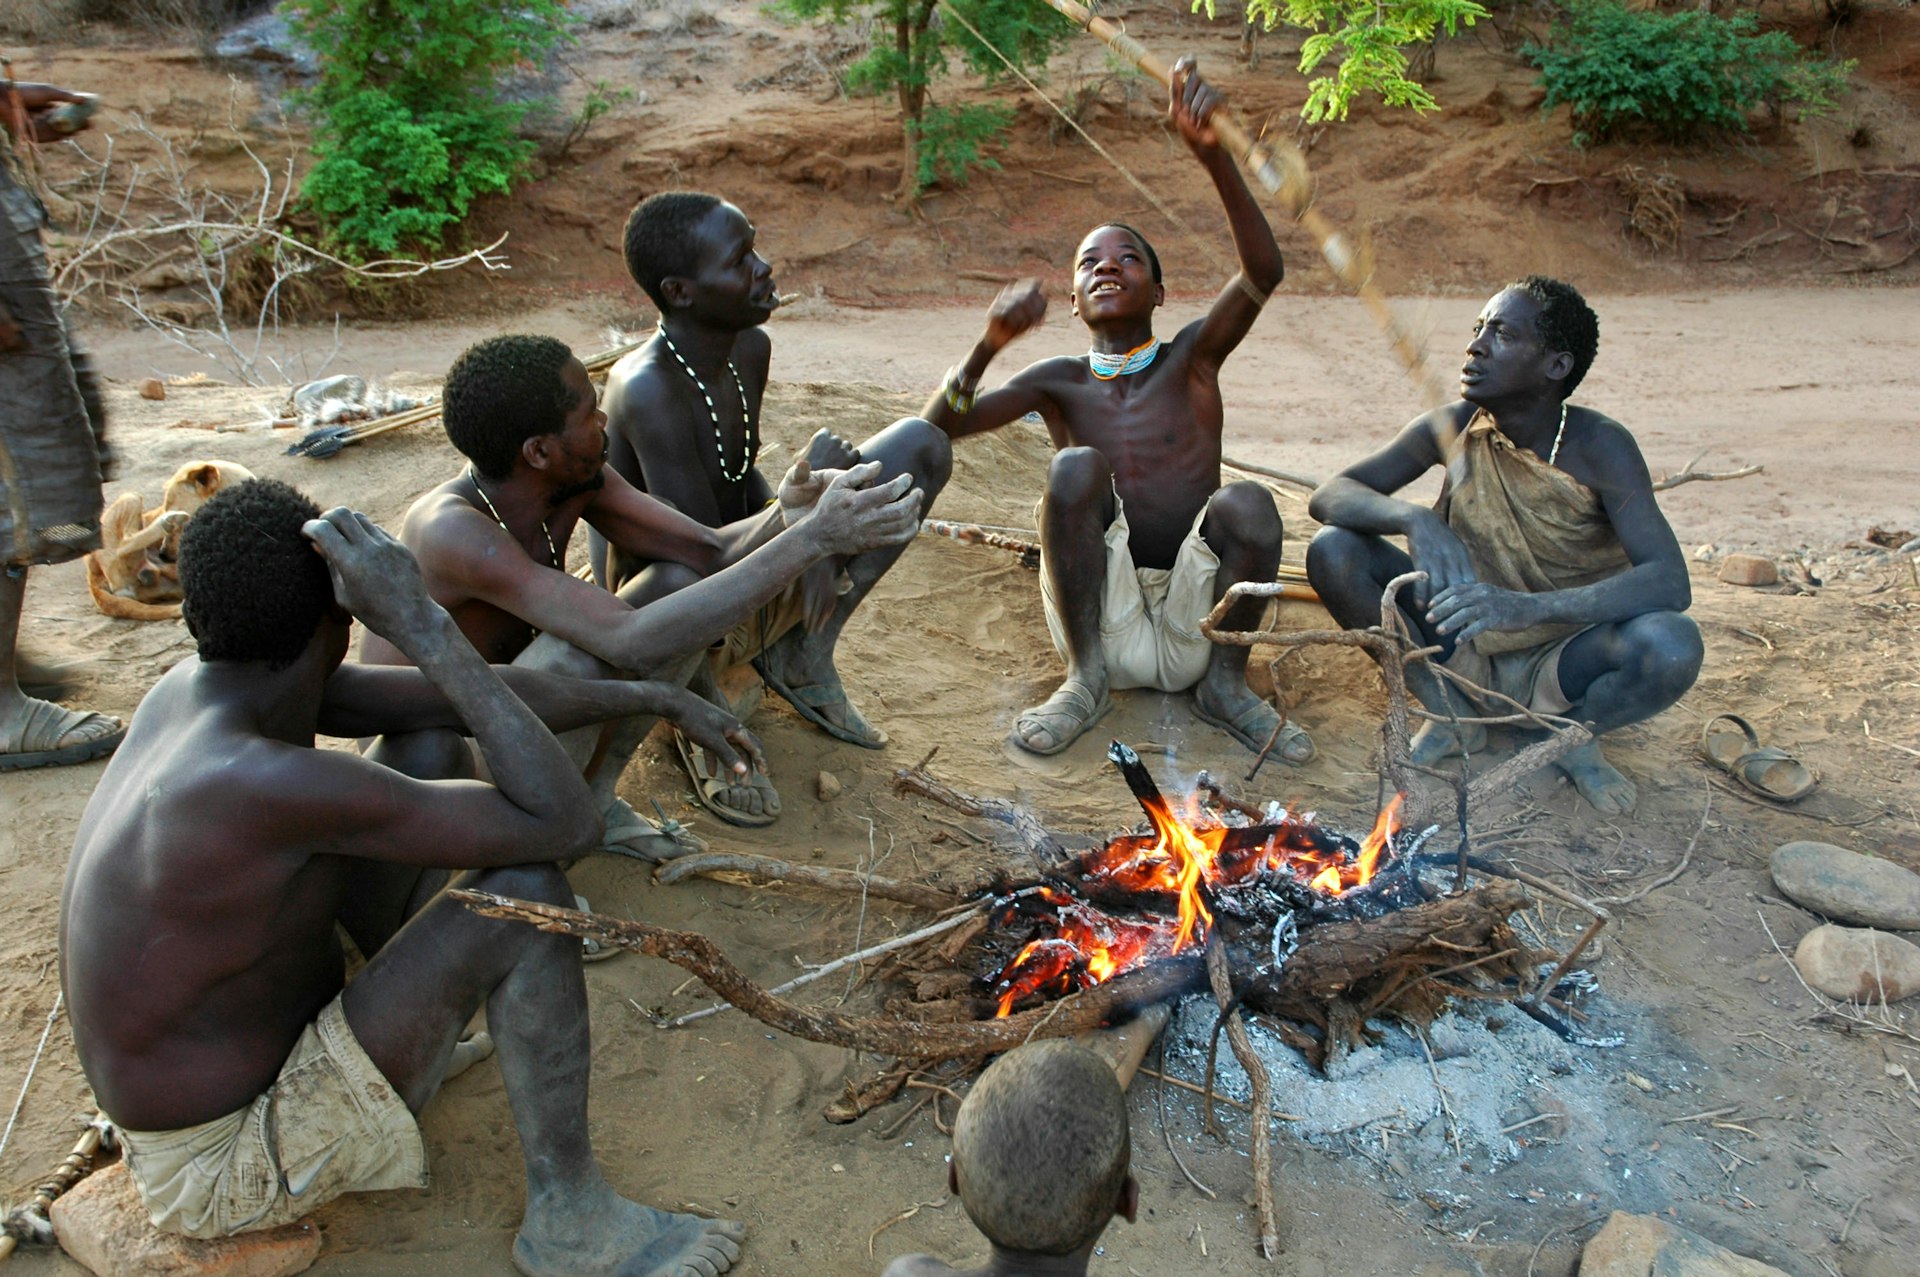 A group of Hadzabe men sitting around the fire with bows and arrows